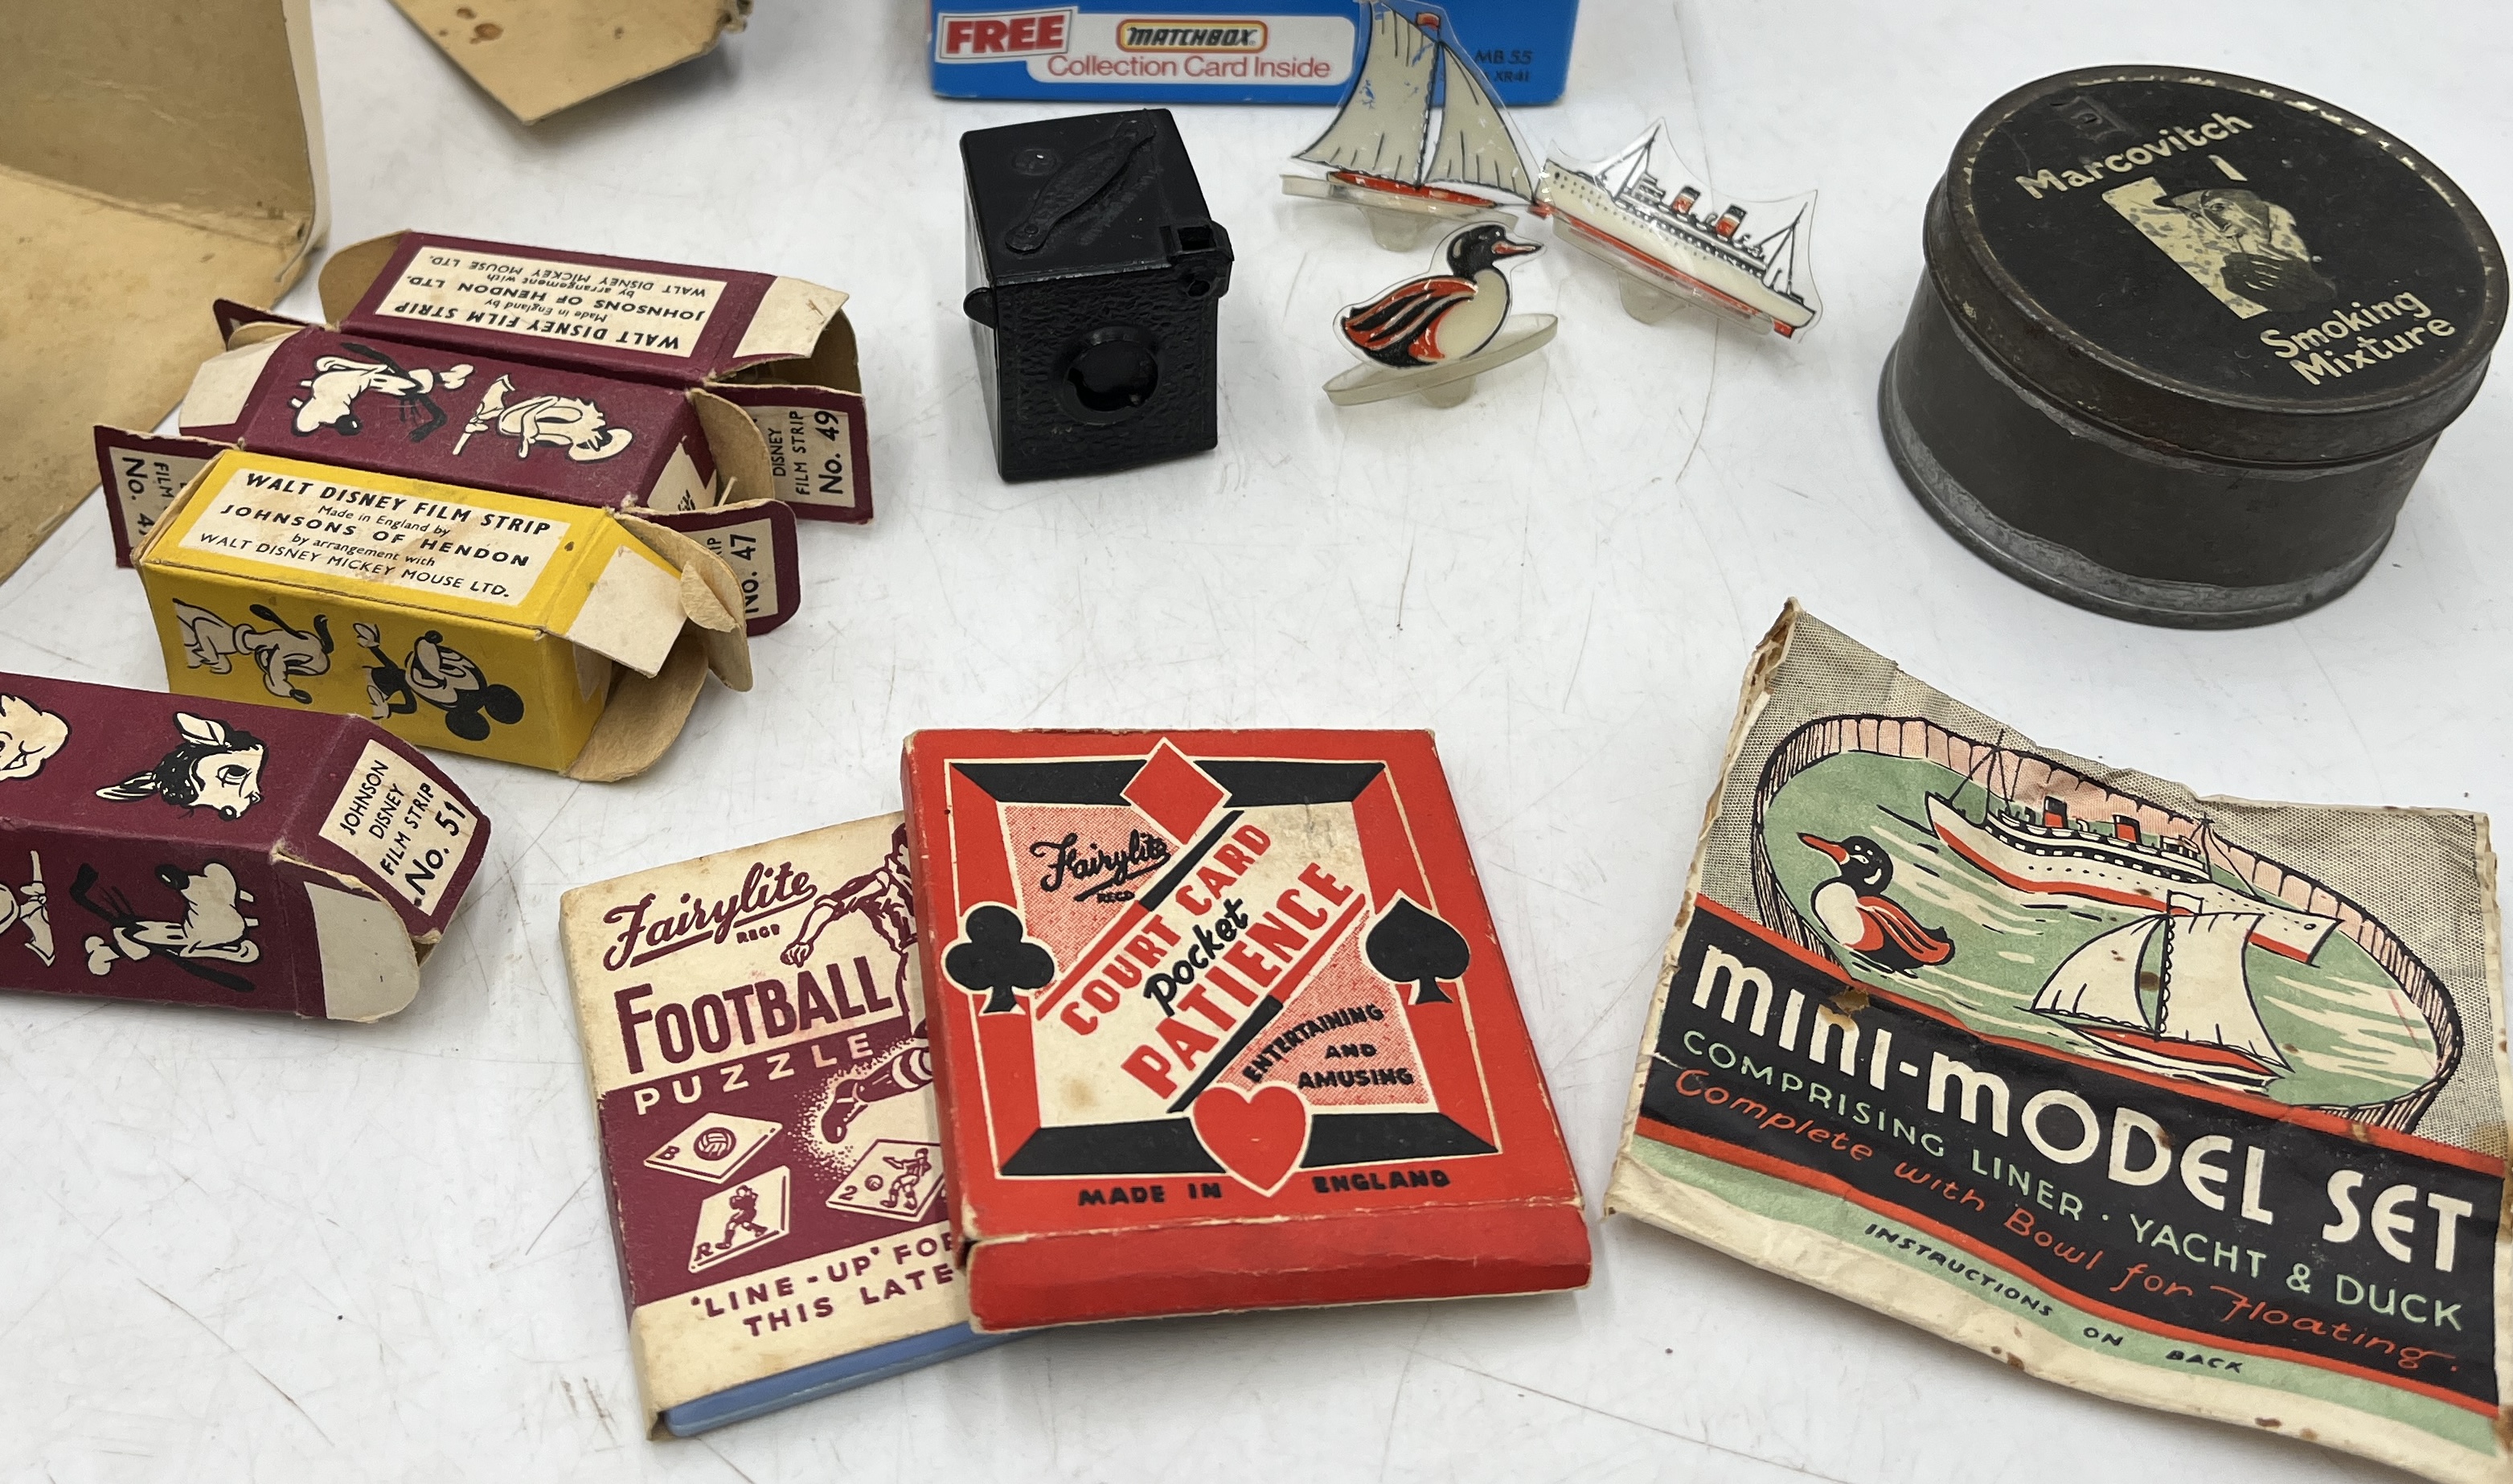 A collection of vintage toys including Johnson Disney projector, Matchbox car, solitaire etc. - Image 3 of 3